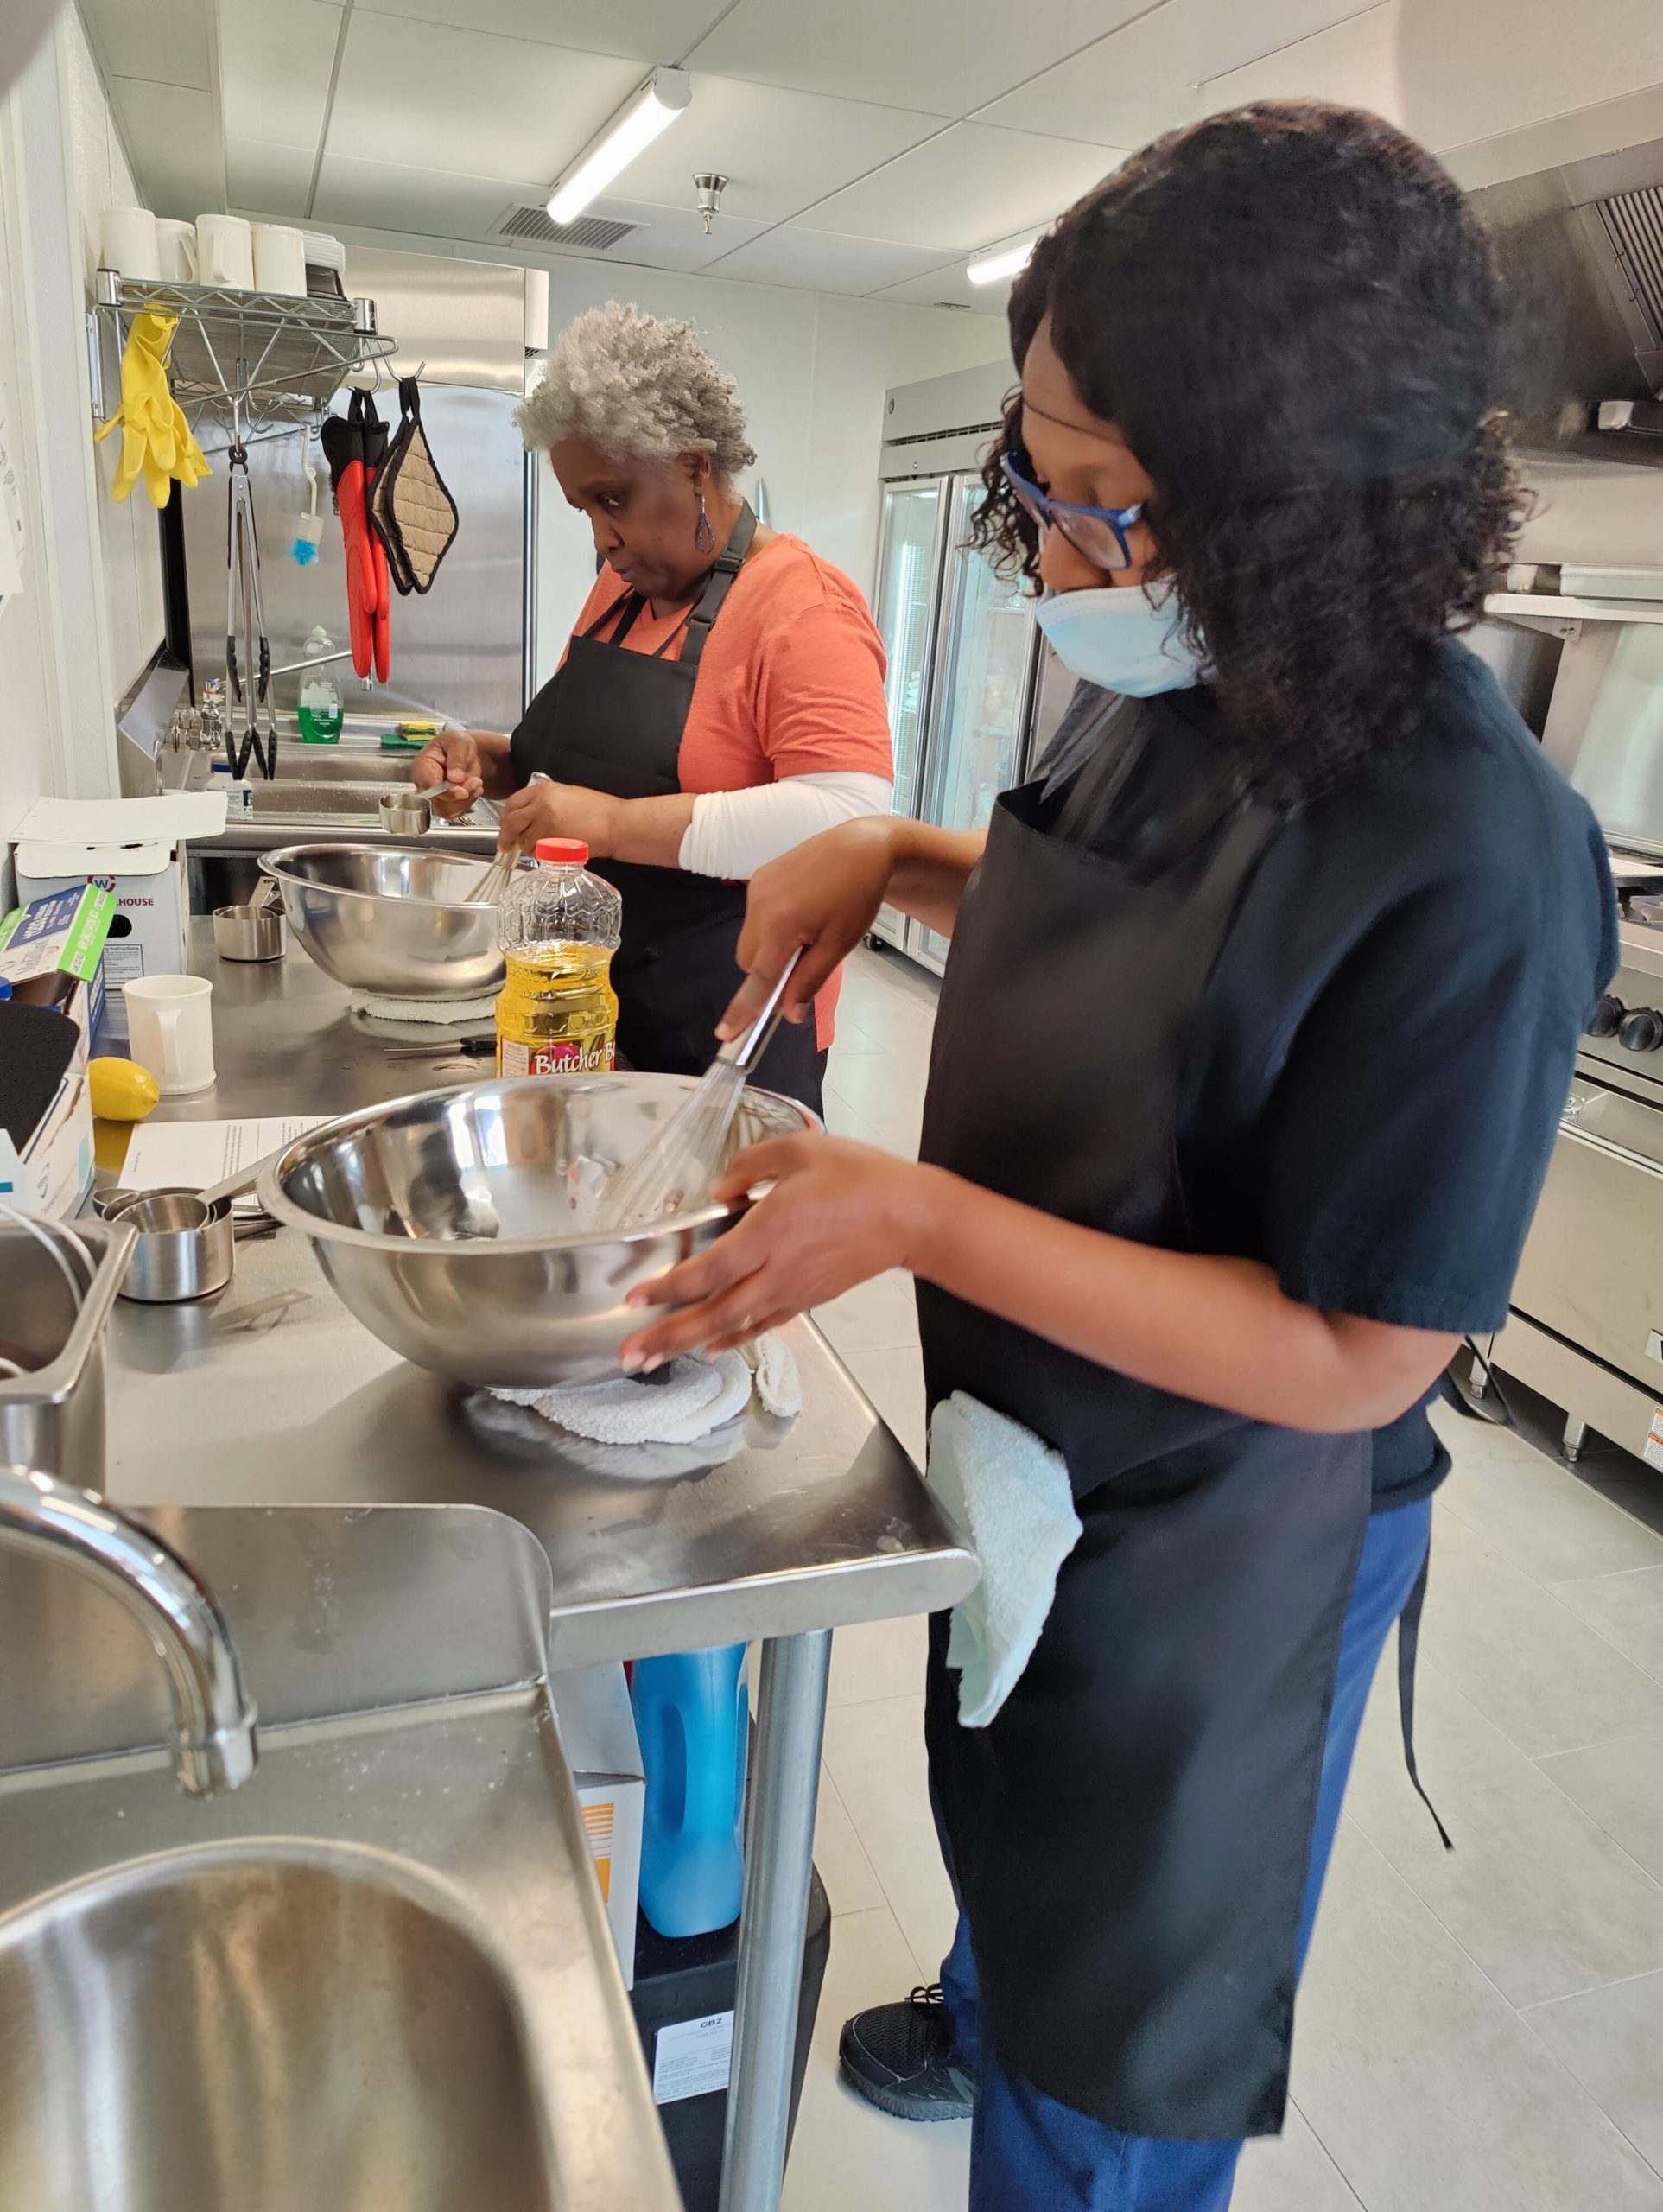 YWCA Culinary Application gets potential professional cooks into the kitchen